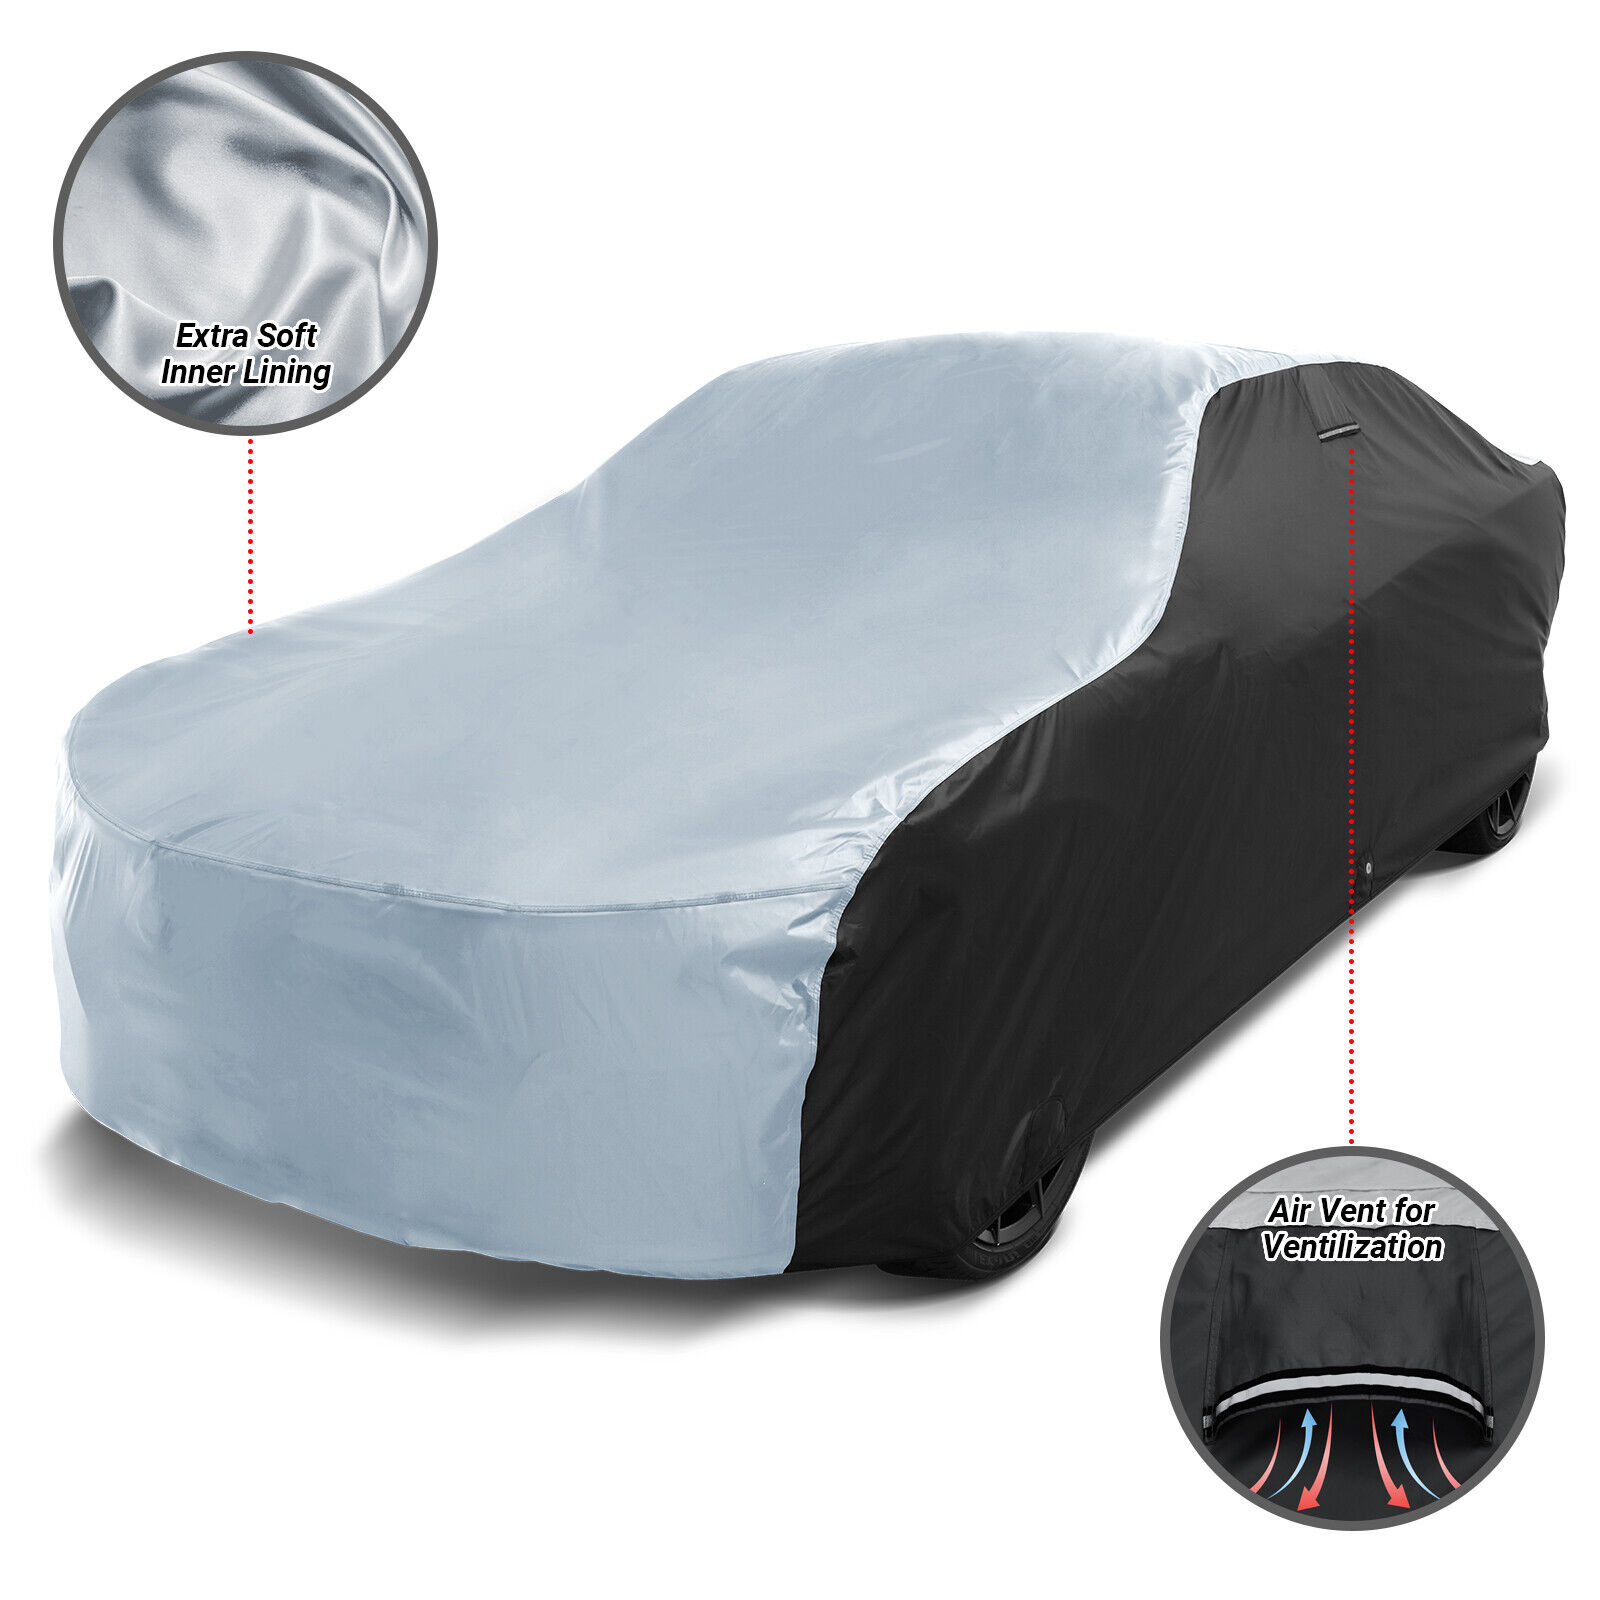 For OLDSMOBILE [CUTLASS] Custom-Fit Outdoor Waterproof All Weather Car Cover